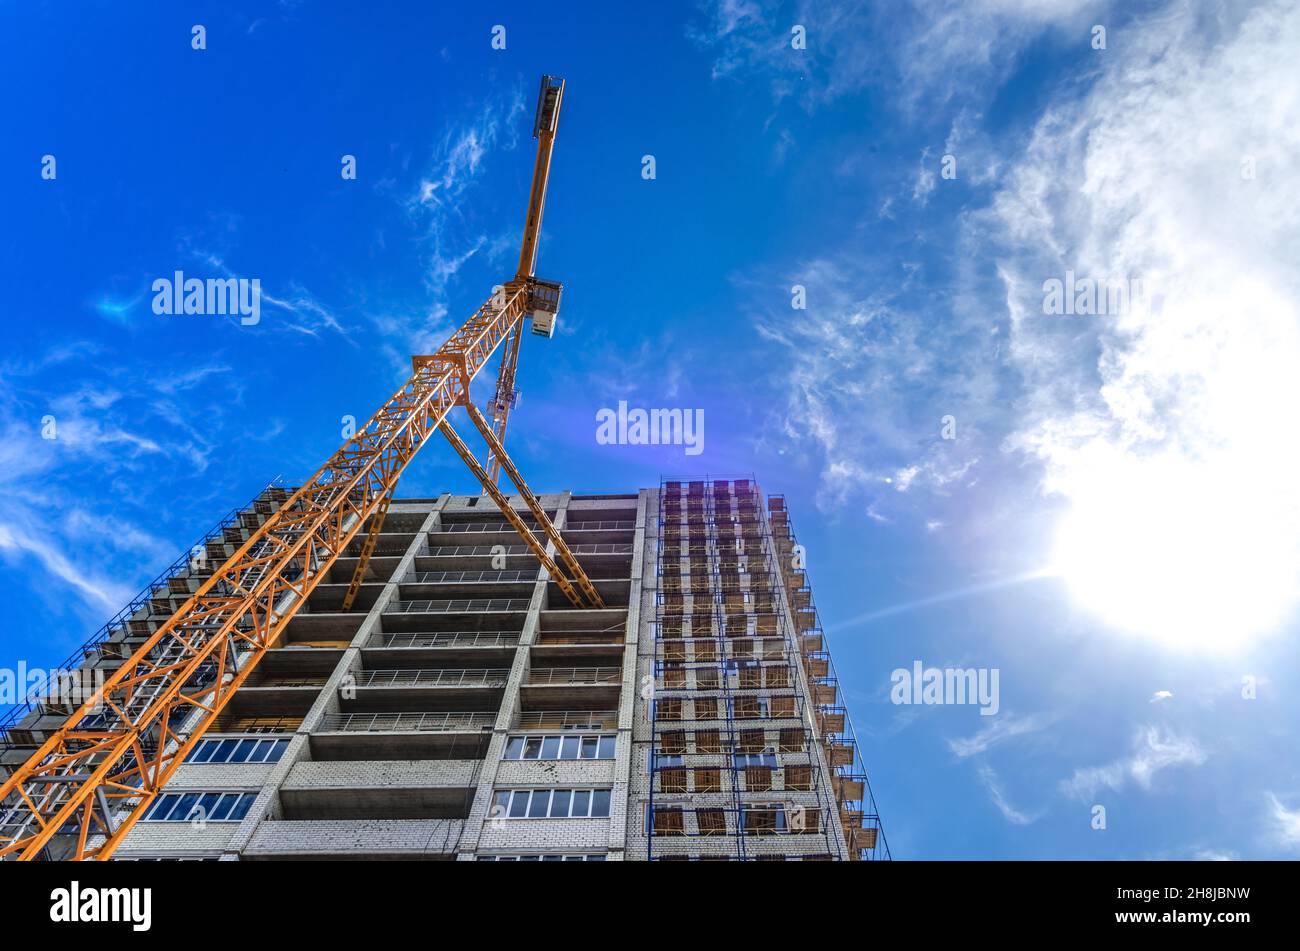 Construction of houses and crane Stock Photo